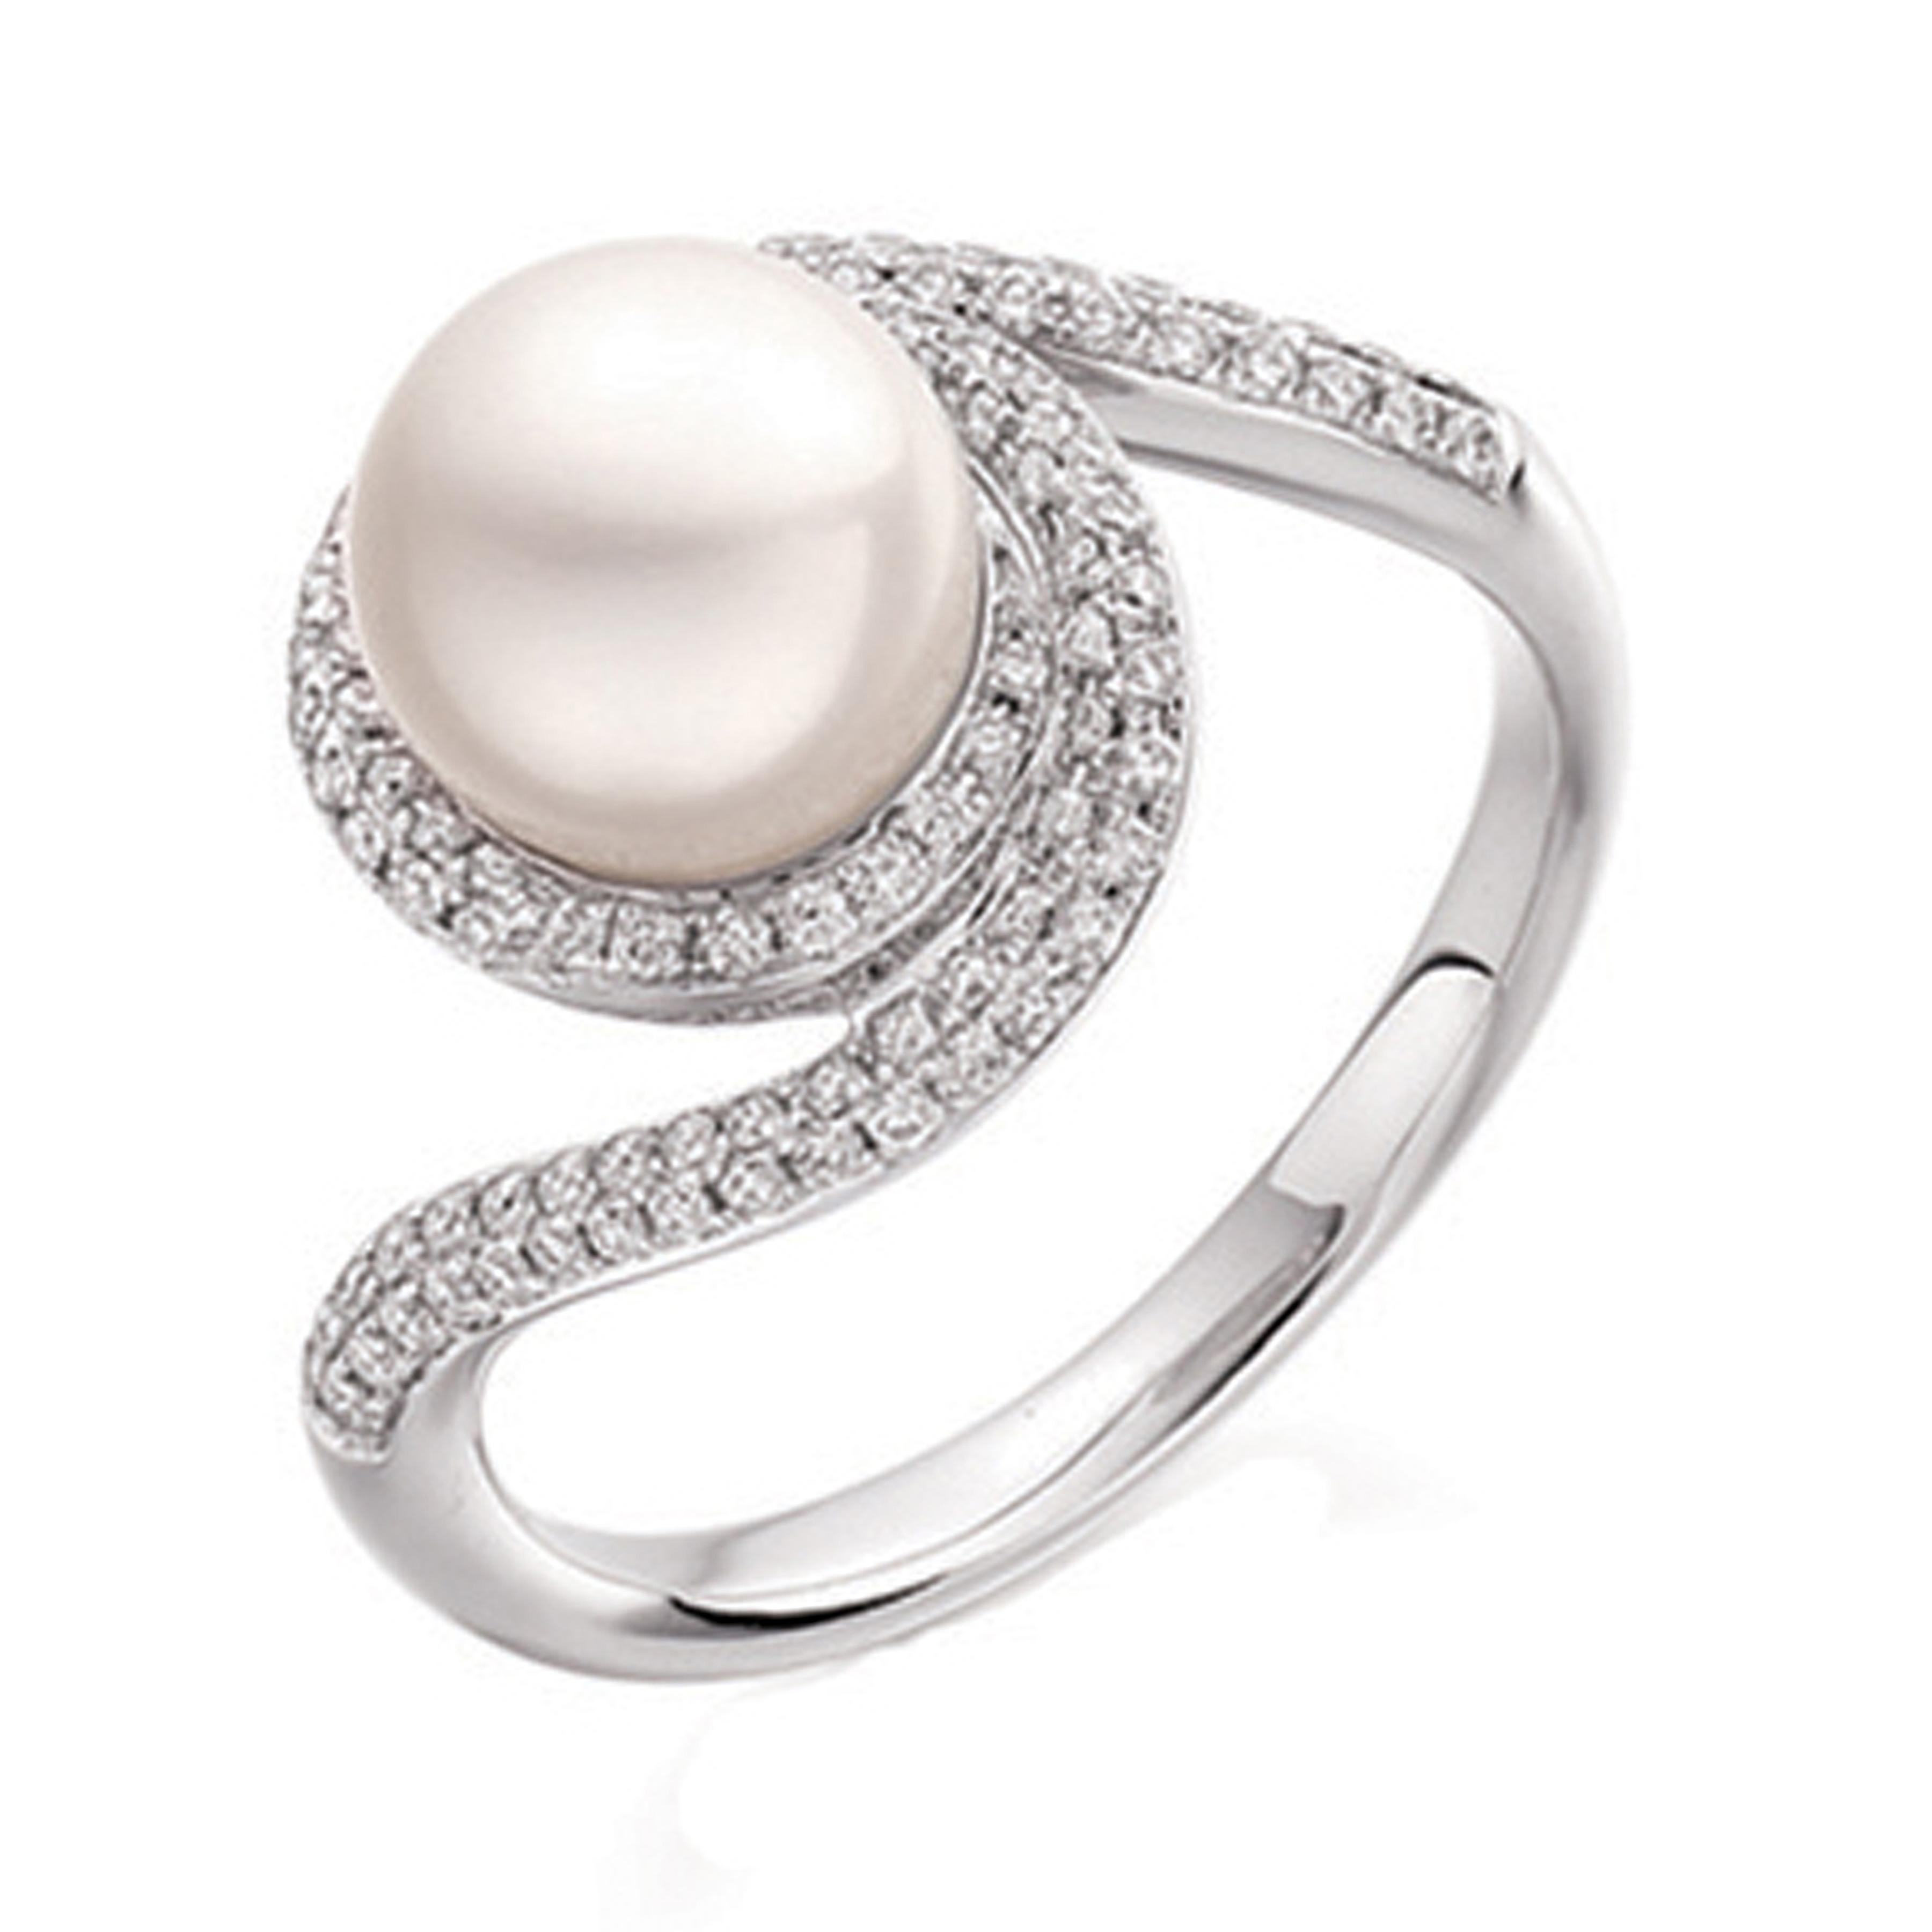 7Mm Round White Pearl Multiple Stones Diamond And Gemstone Ring